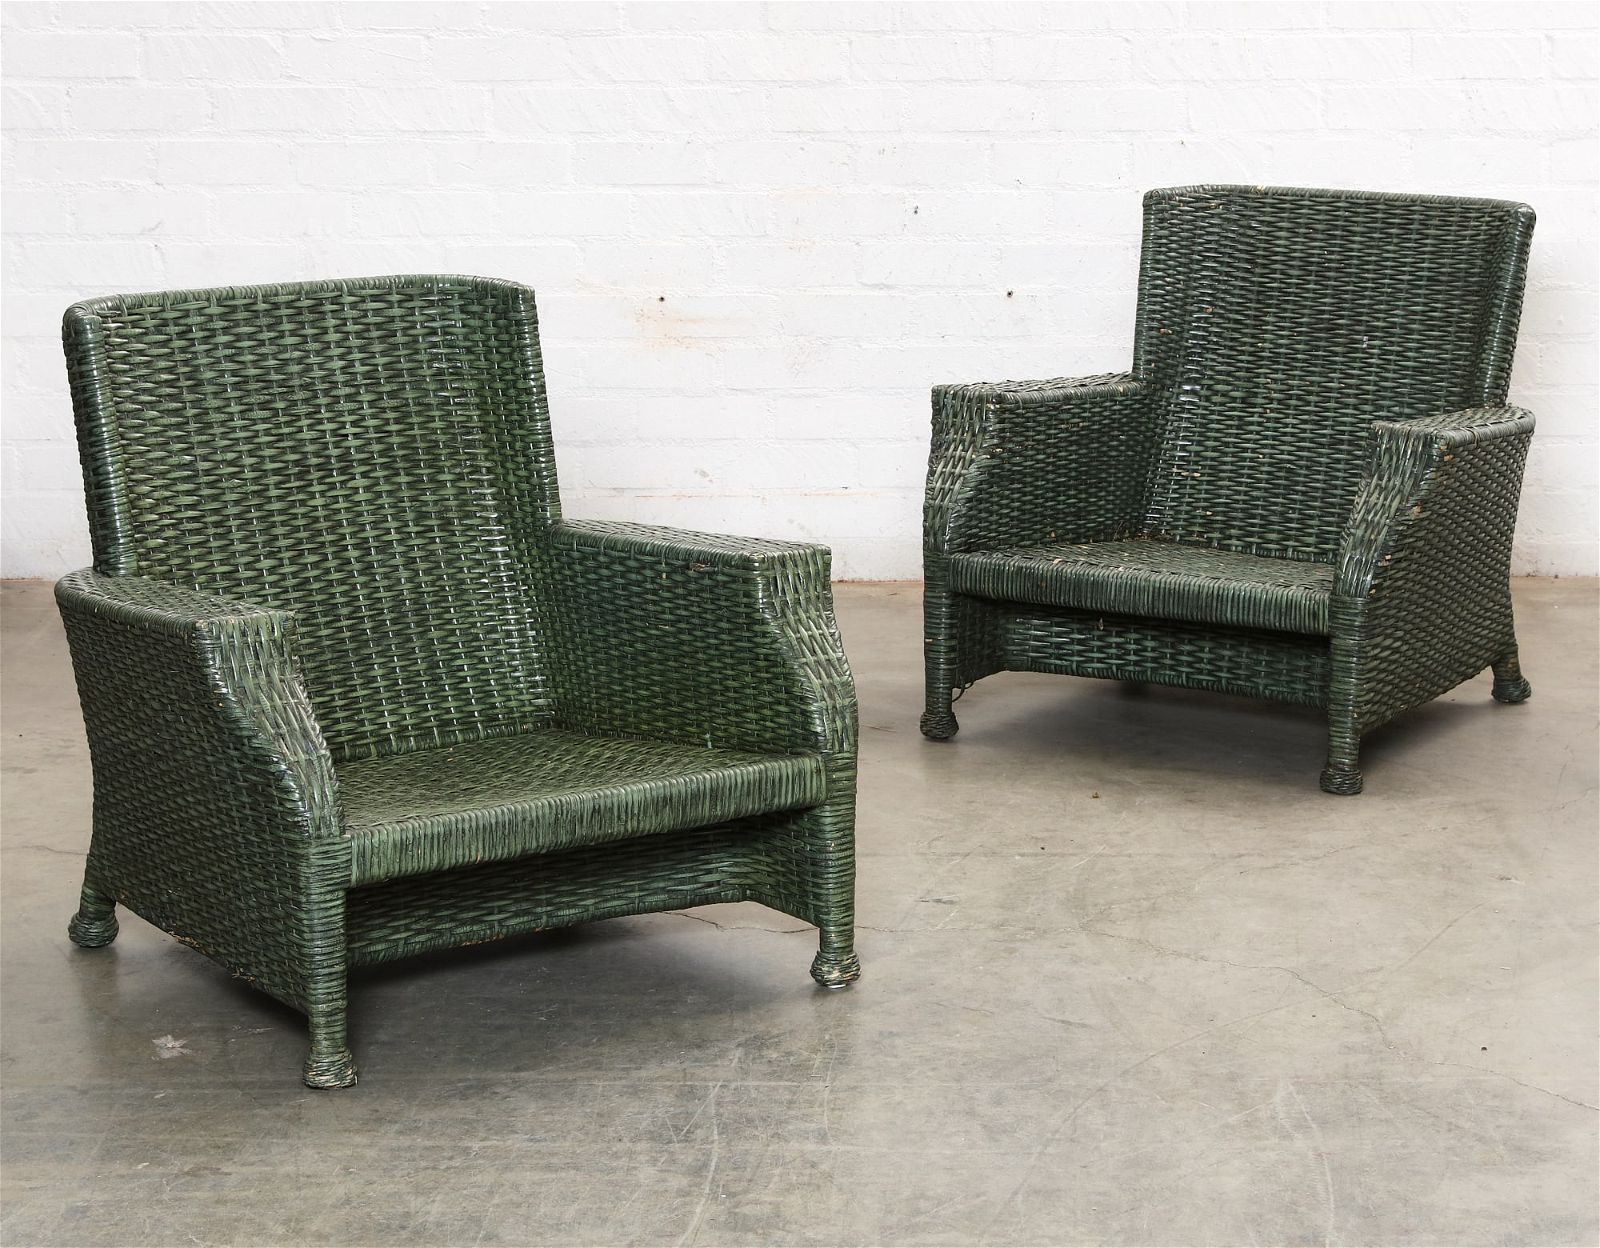 A PAIR OF MCGUIRE WOVEN RATTAN 2fb2e5b